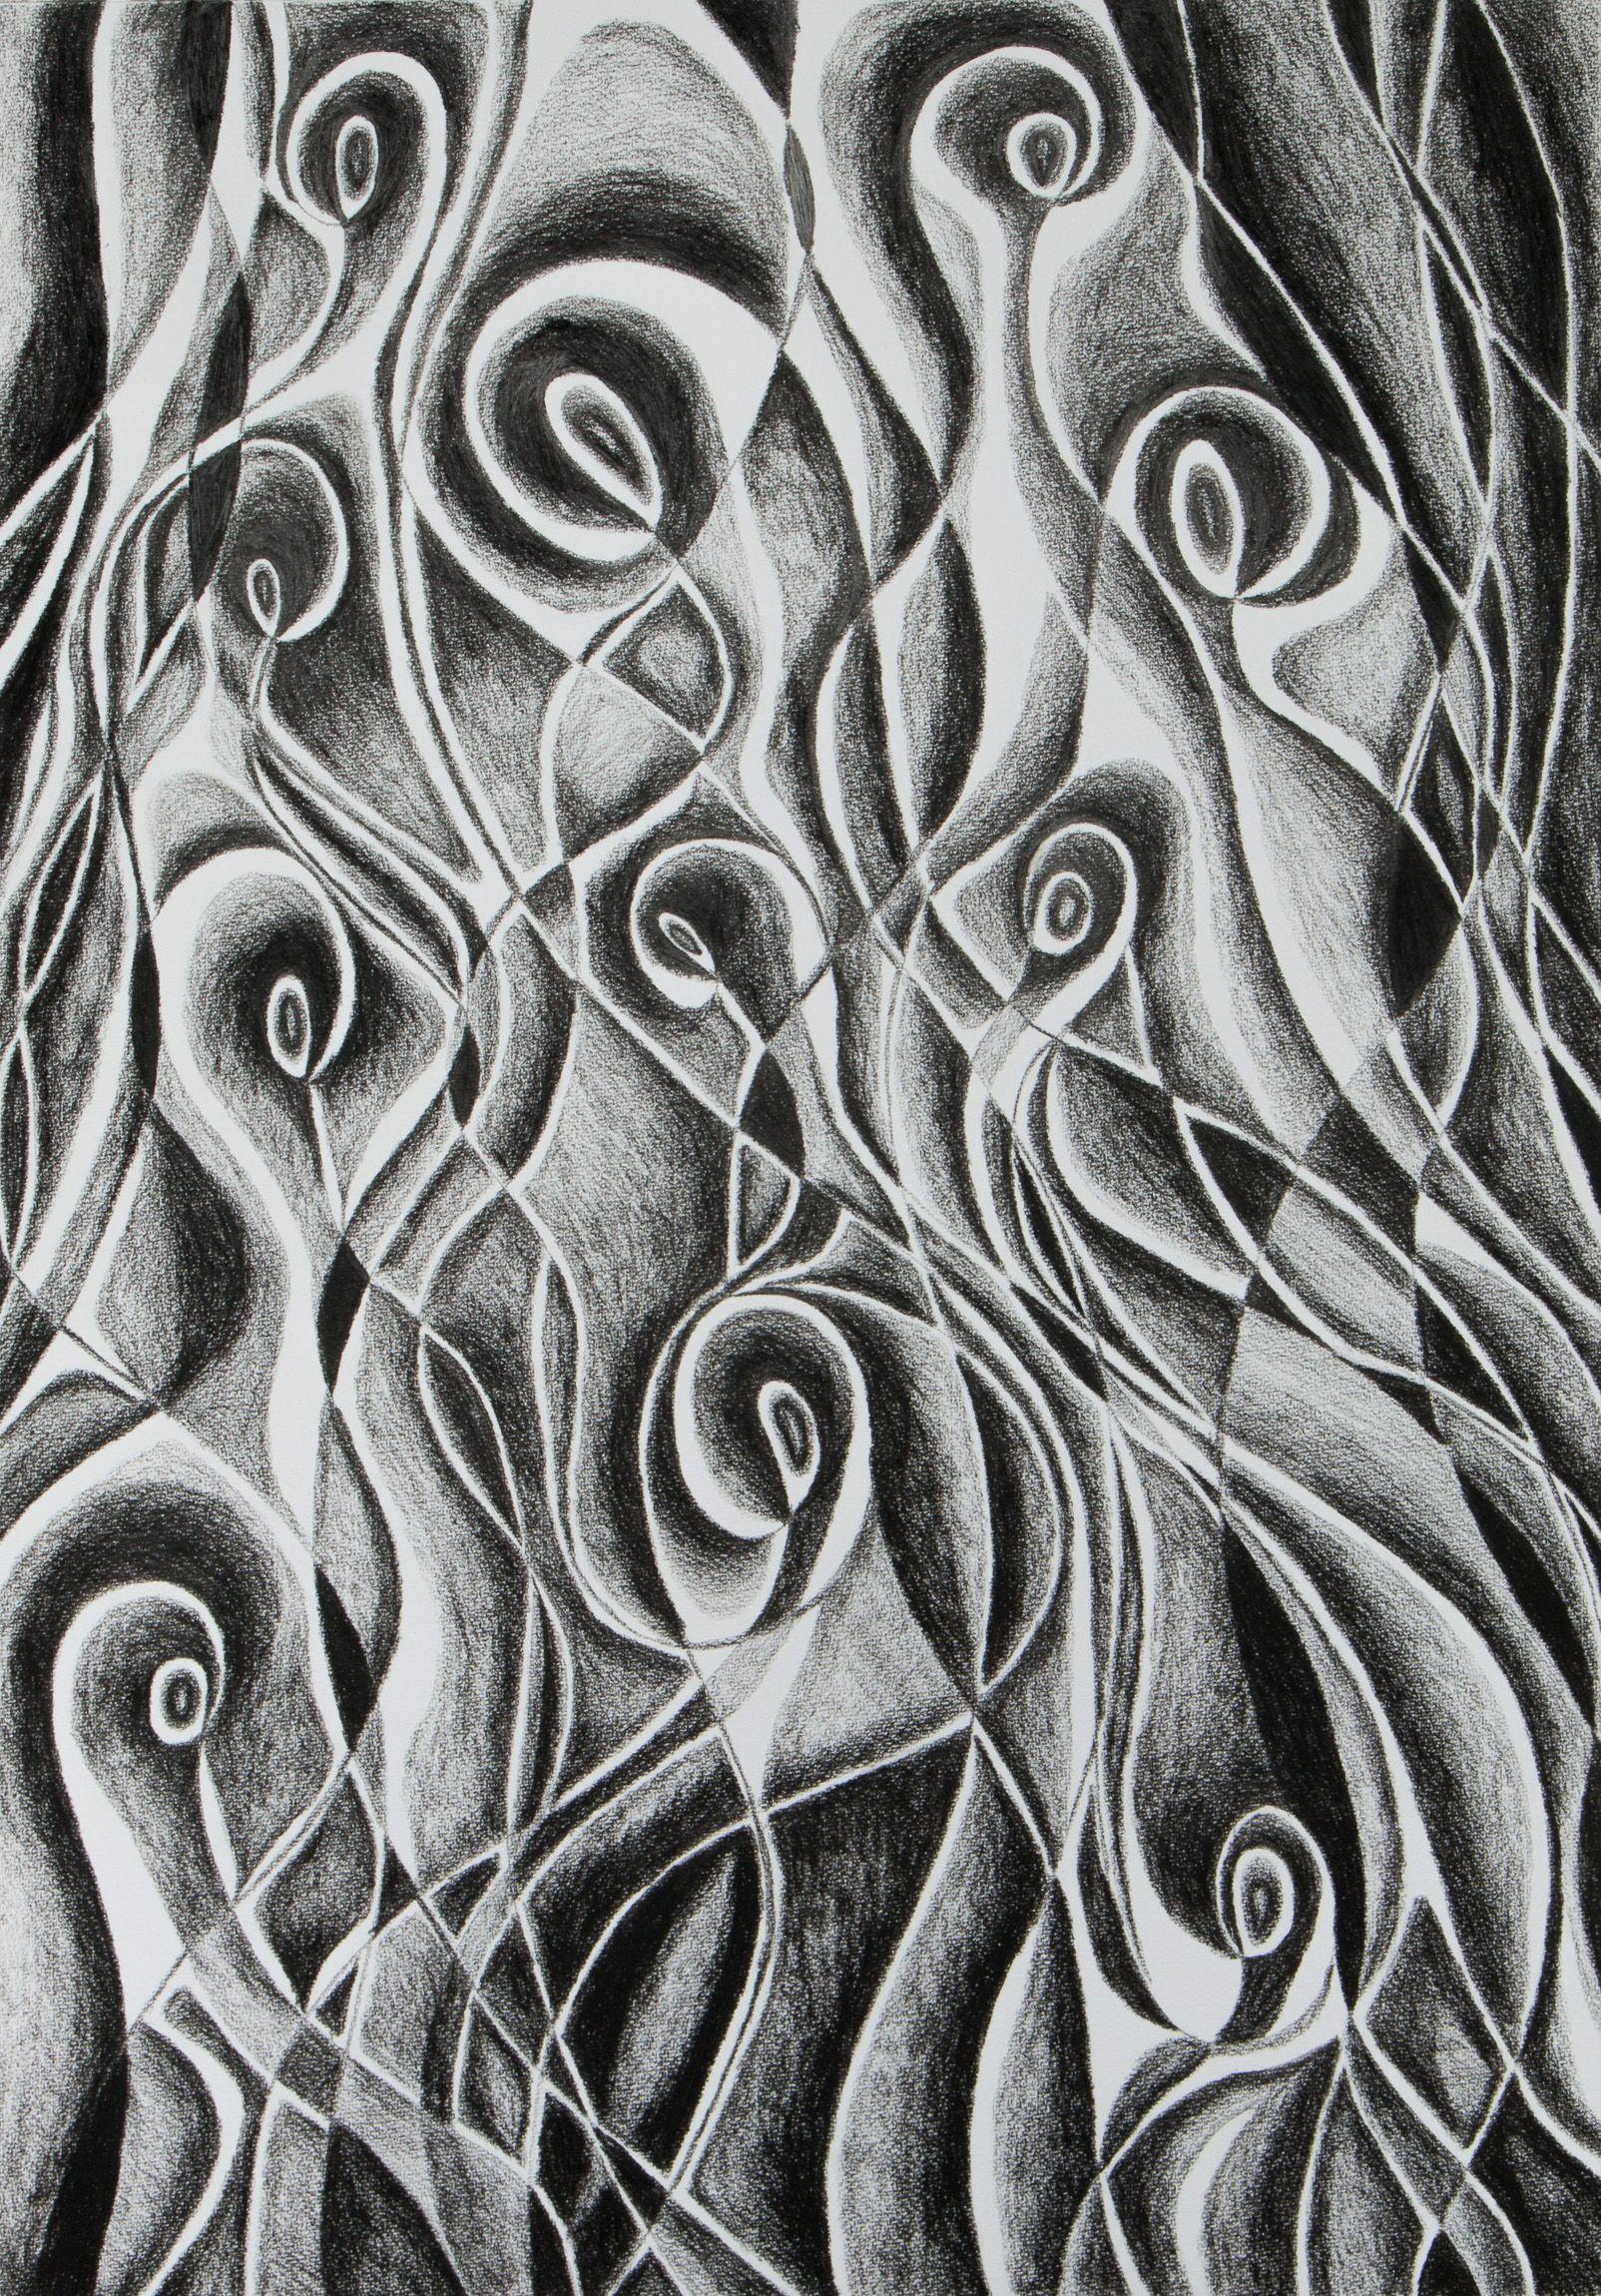 Stefan Fierros Abstract Drawing - The Guardians, Drawing, Charcoal on Paper